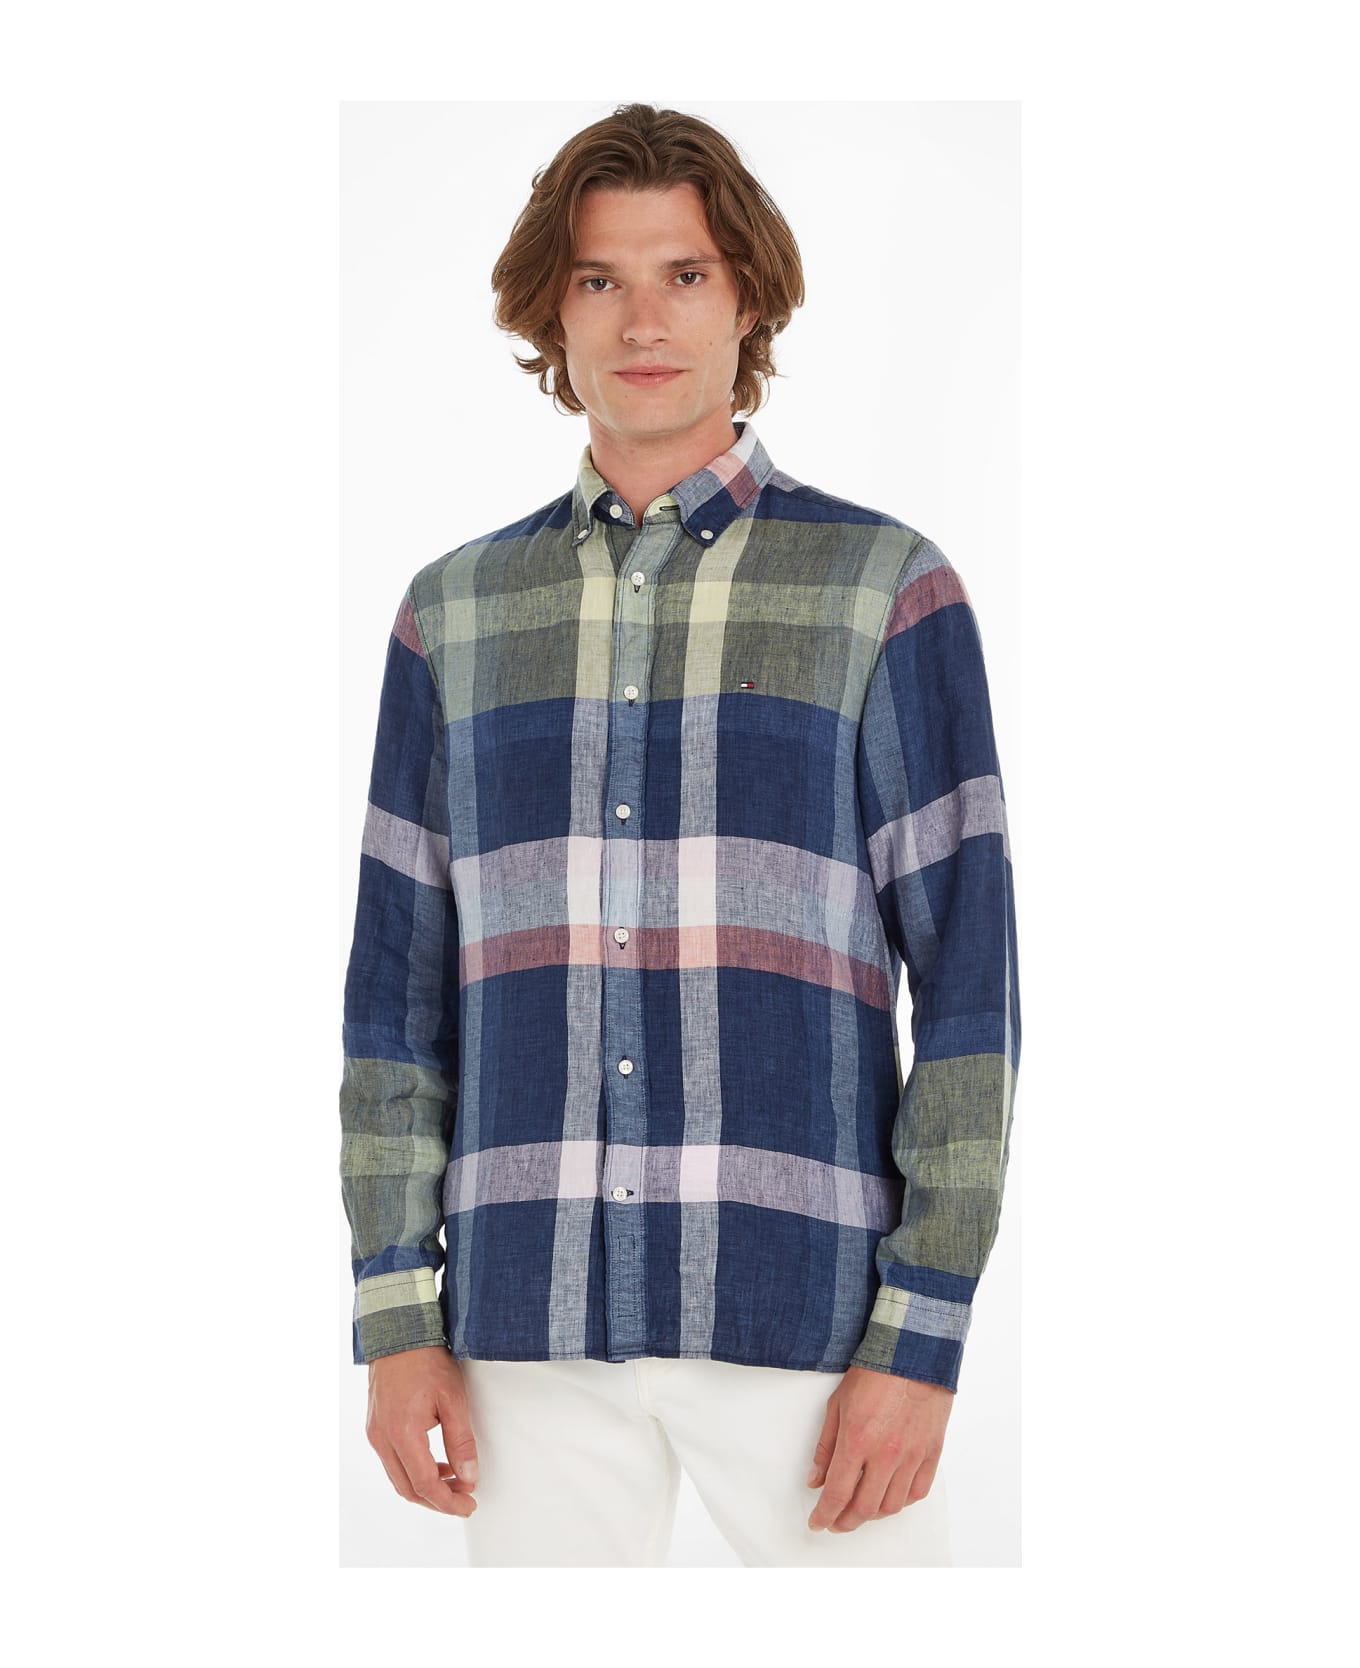 Tommy Hilfiger Multicolored Checked Shirt - CARBON NAVY/MULTI